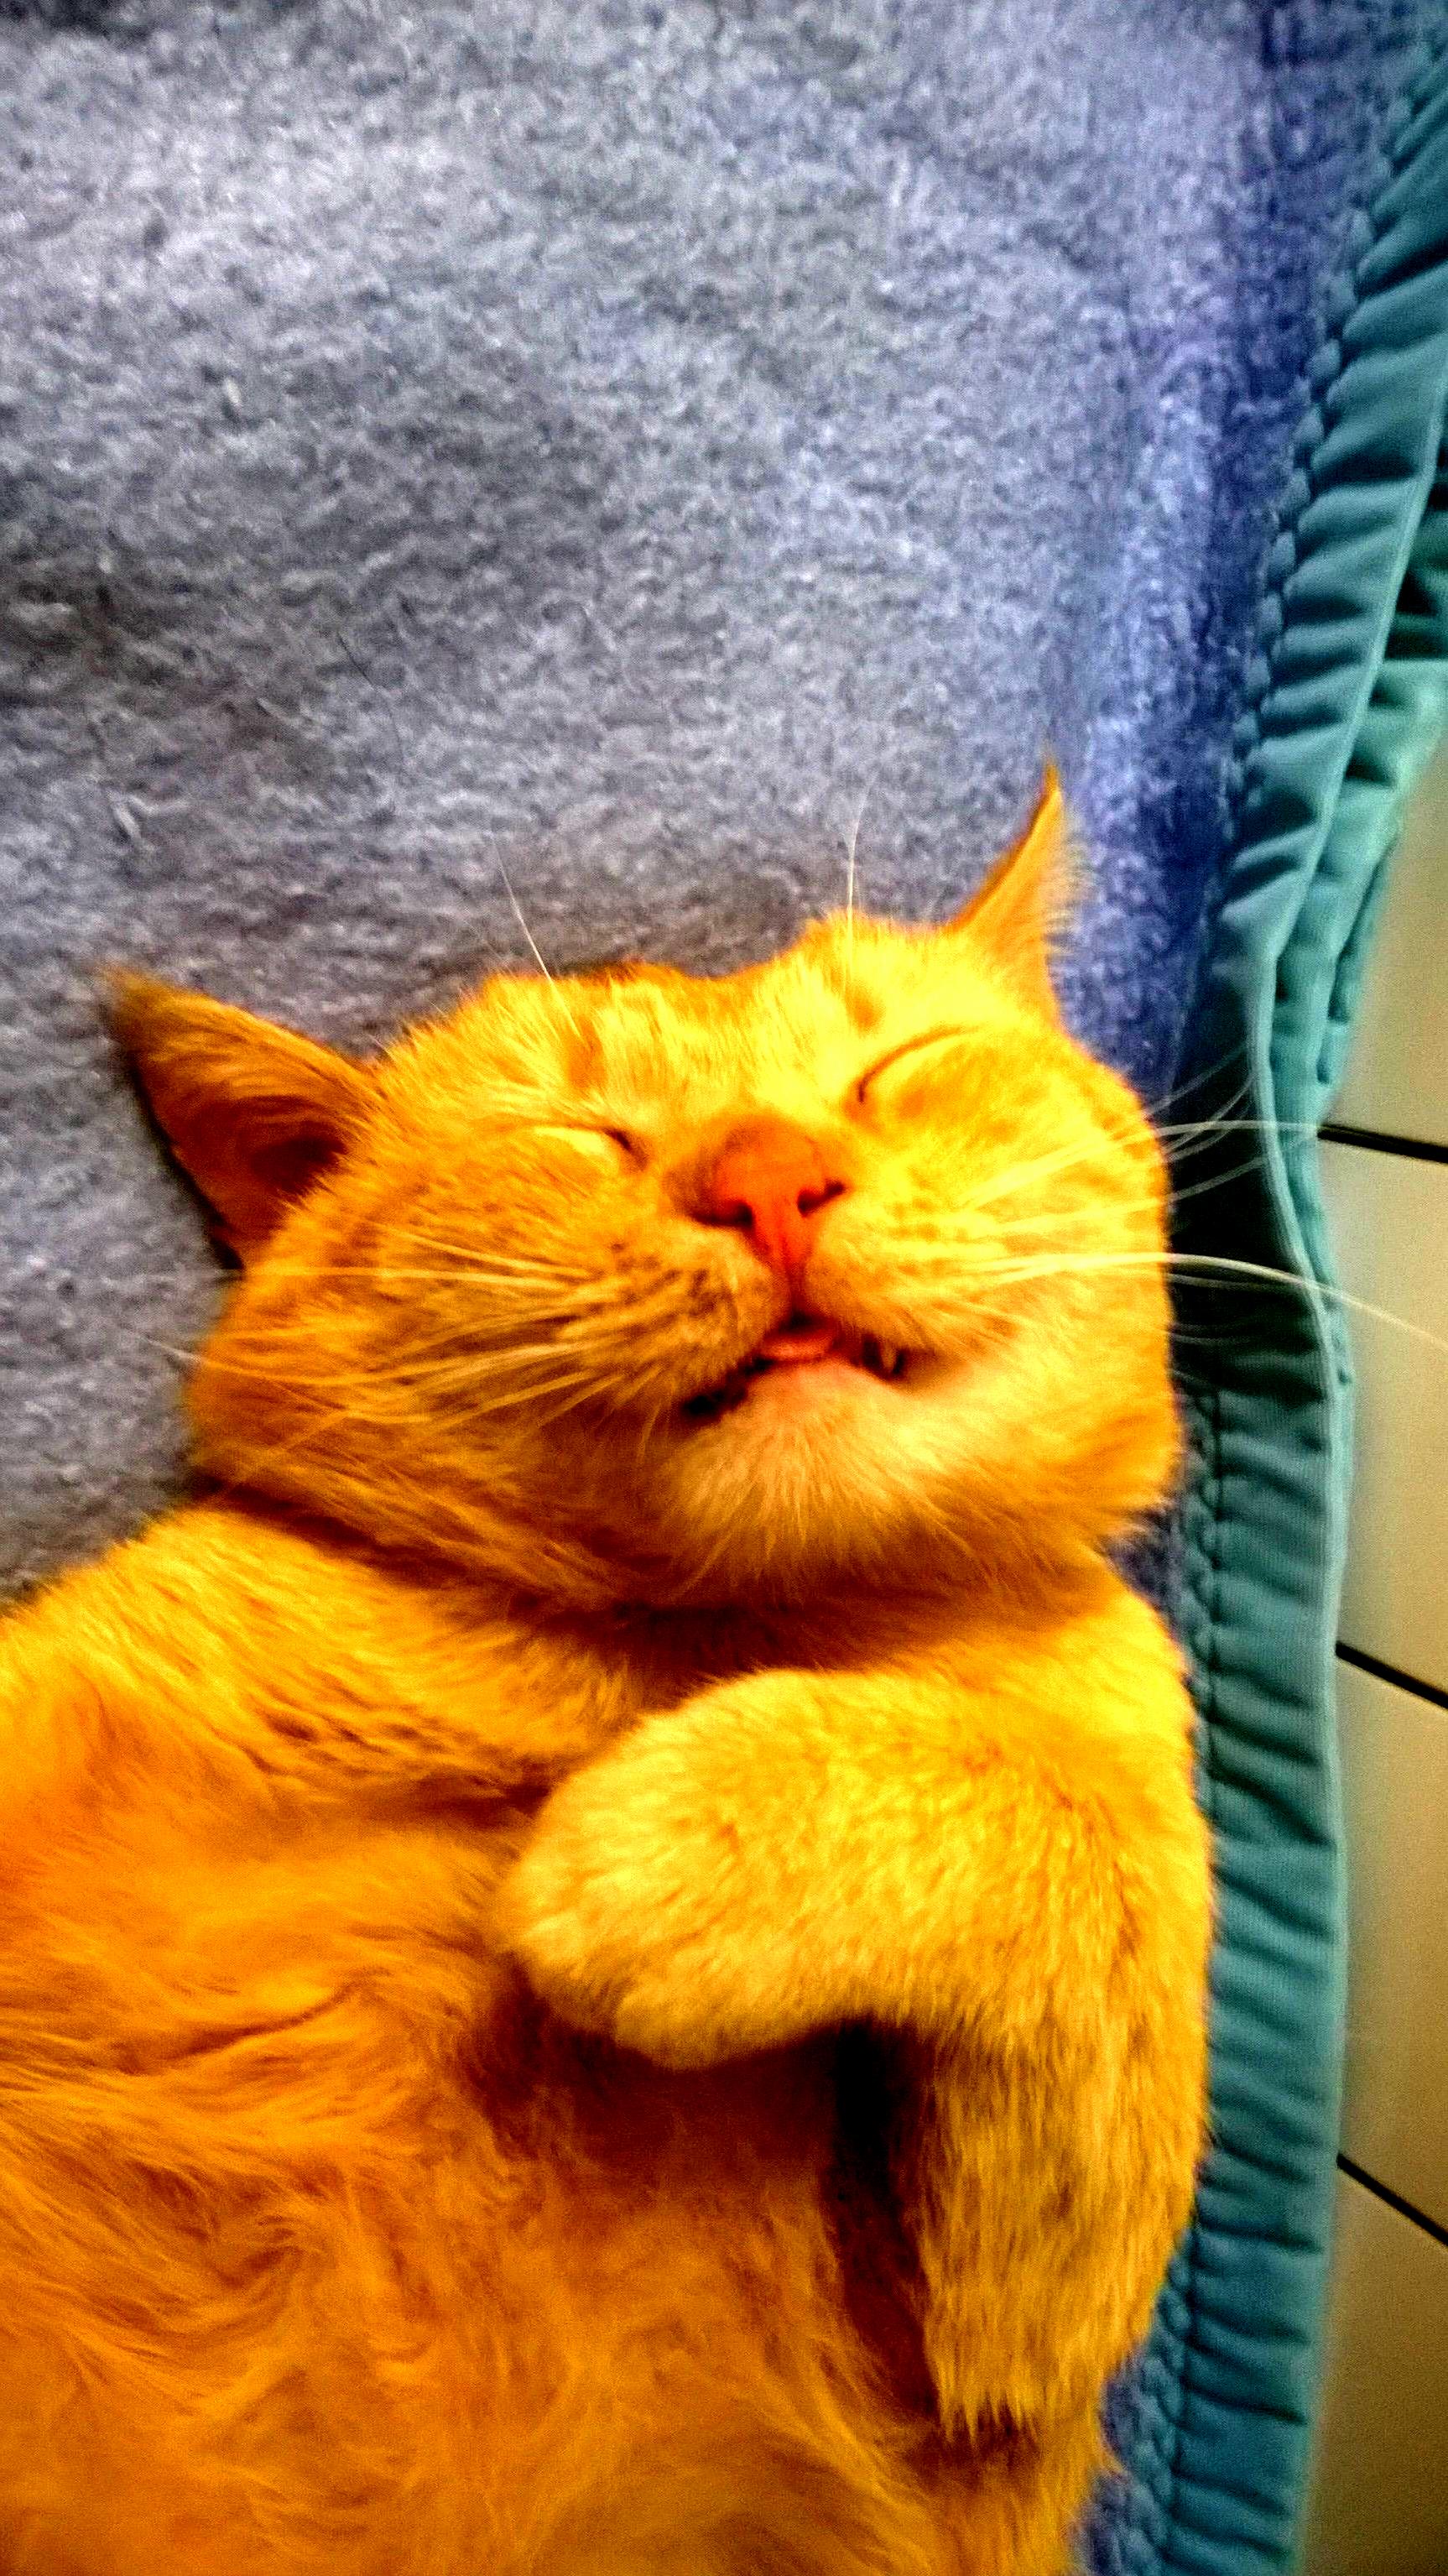 This is how my cat looks like when he sleeps